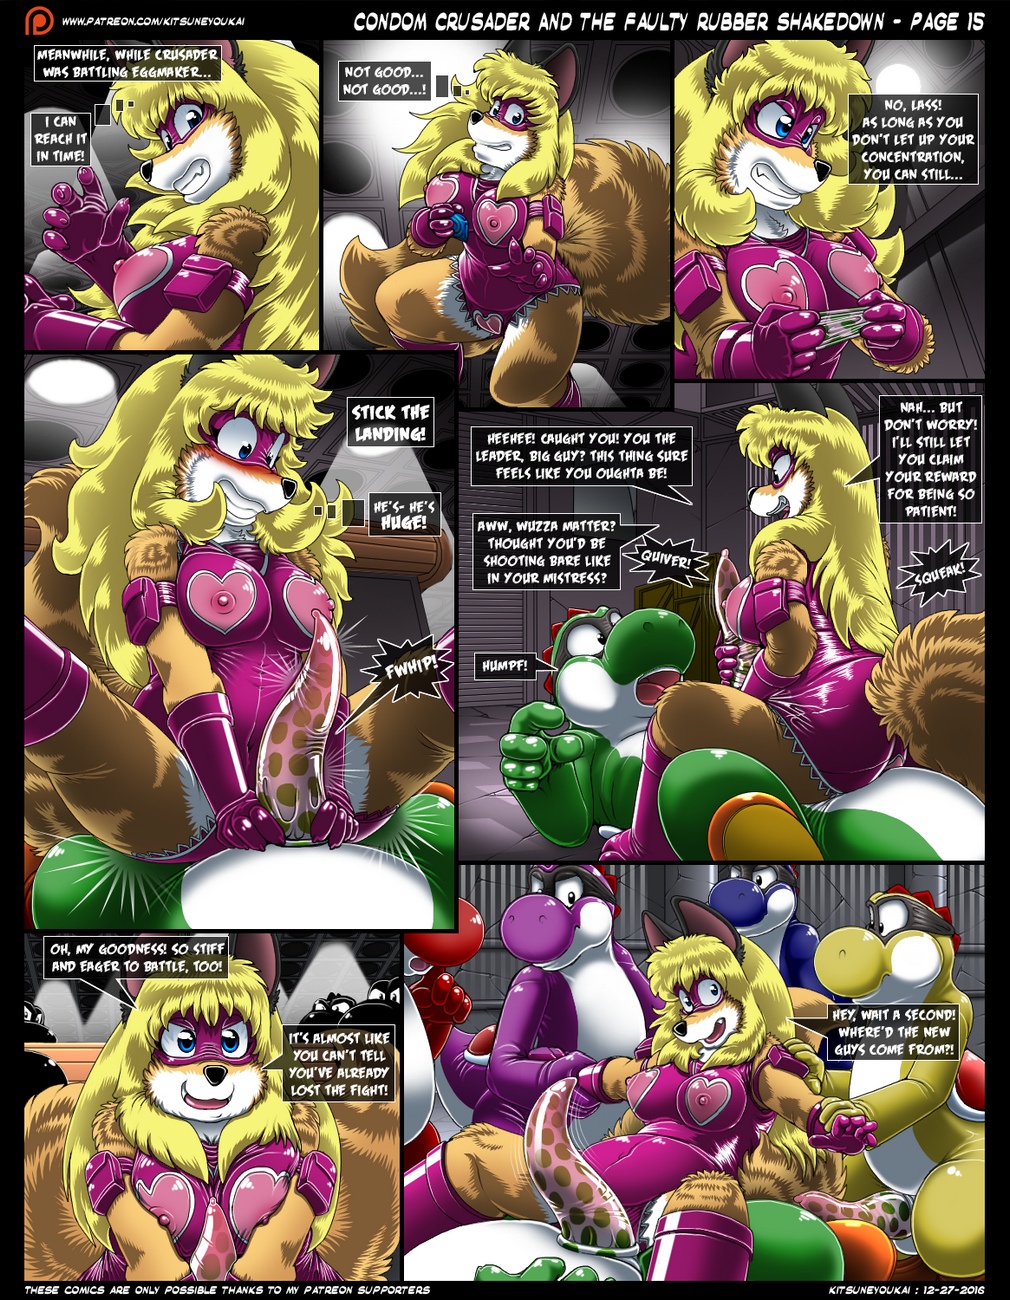 Condom Crusader And The Faulty Rubber Shakedown Comic Porn Hd Porn Comics